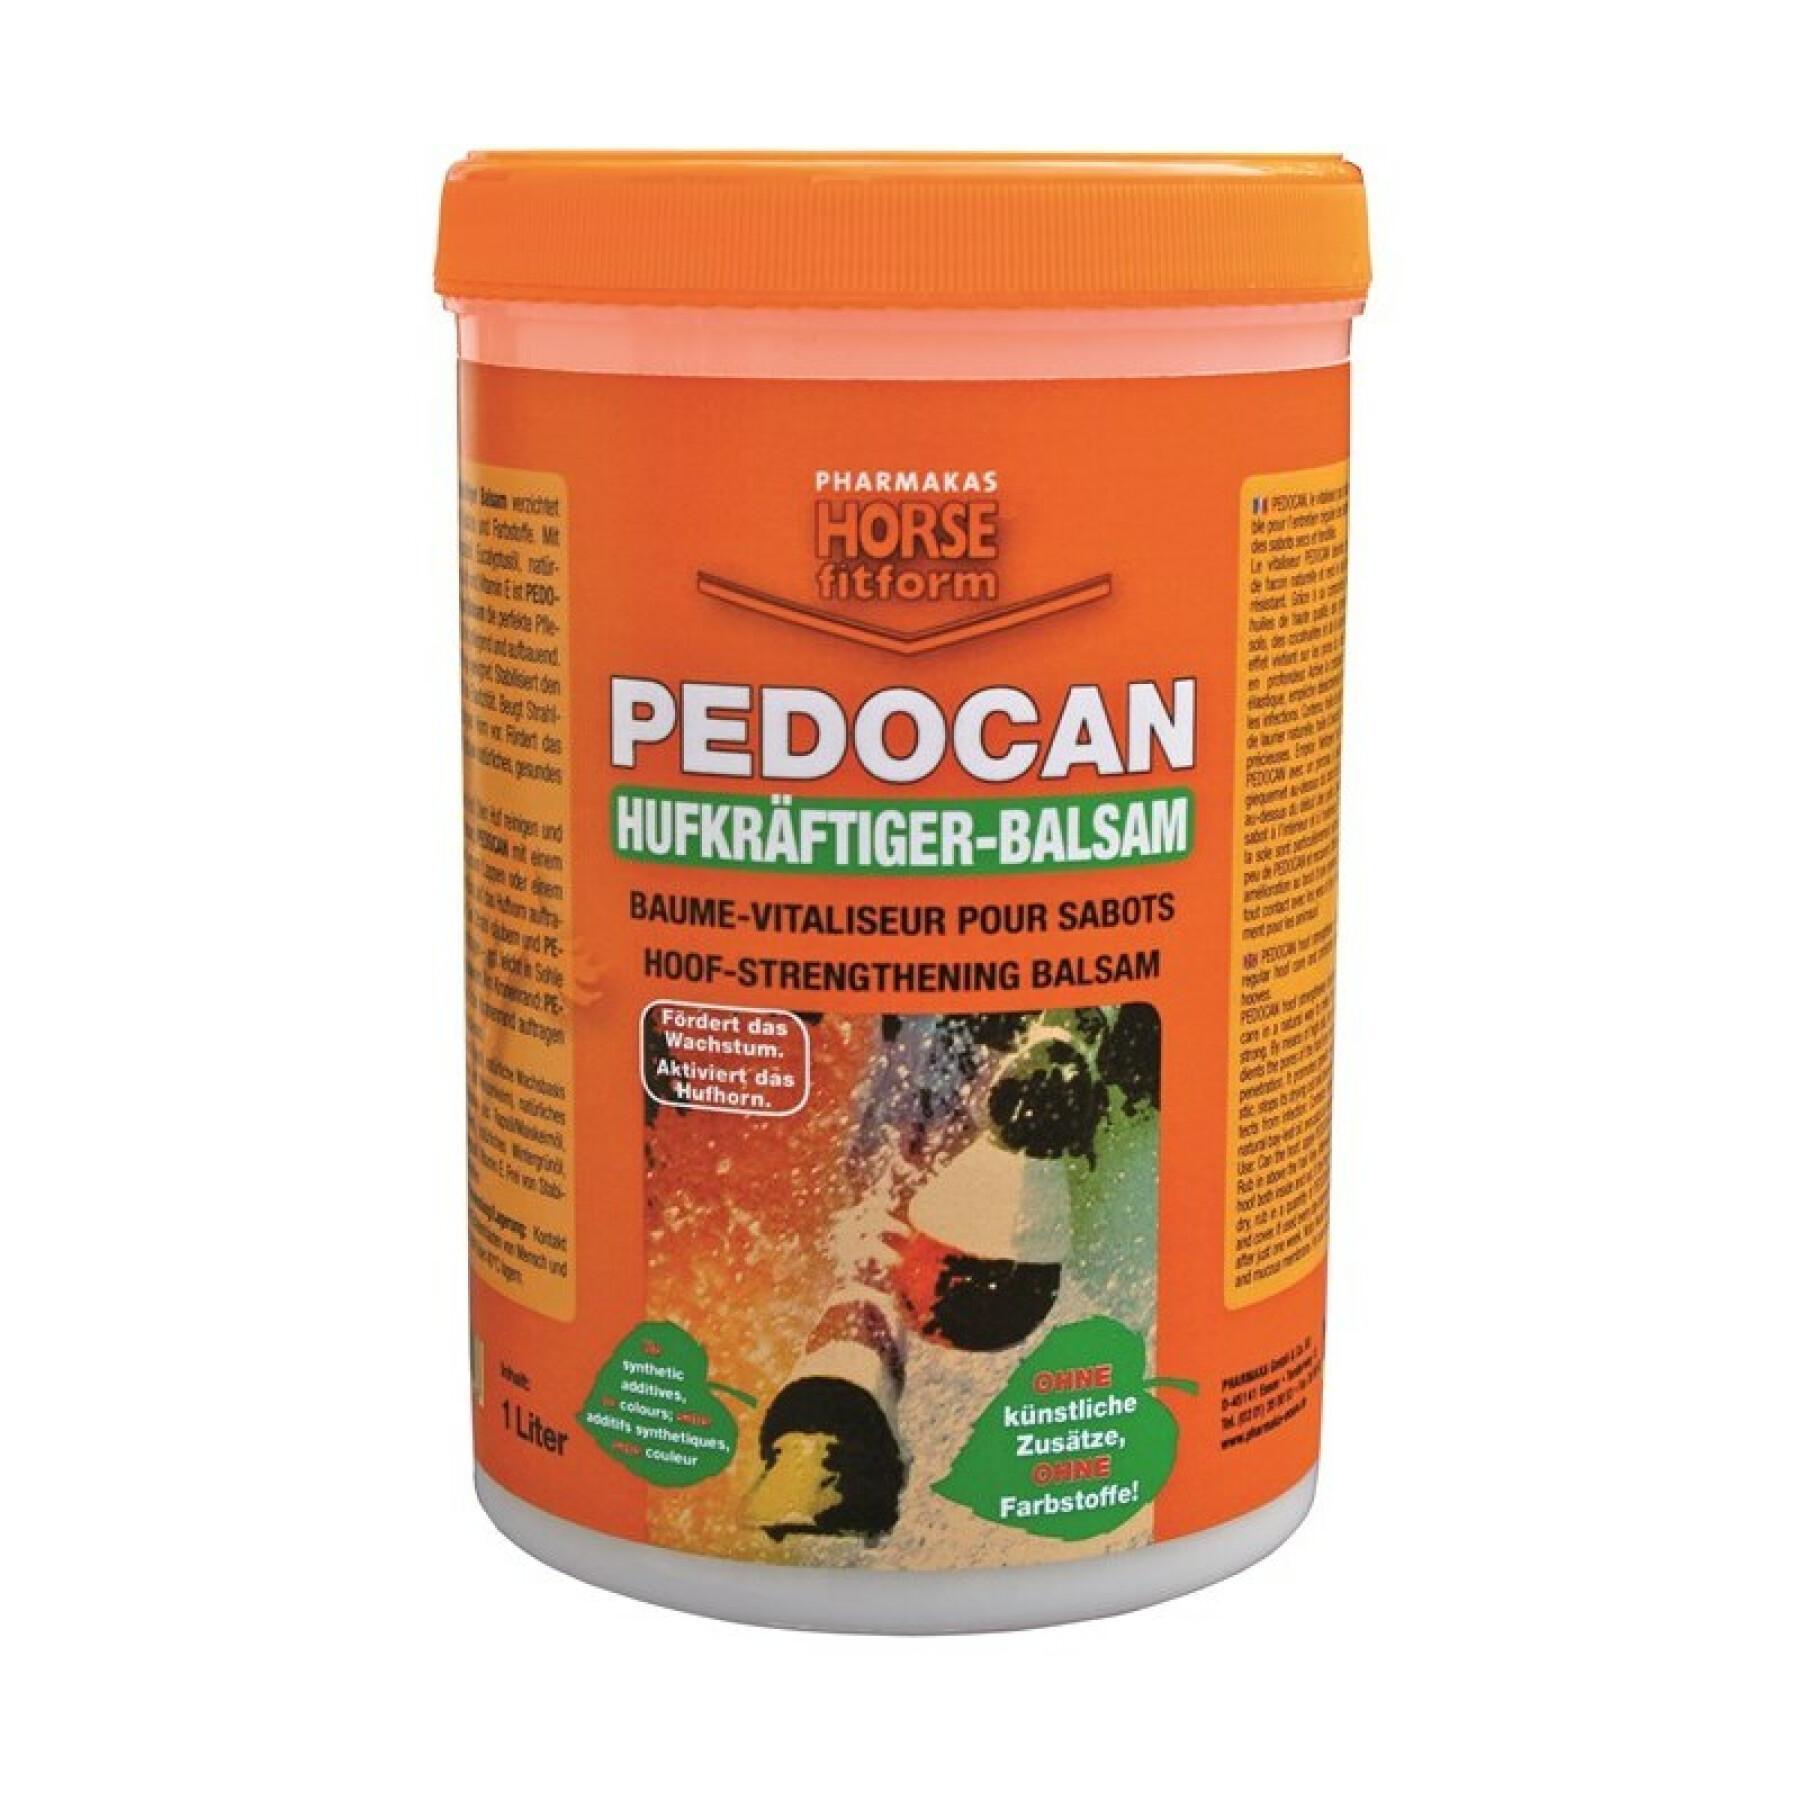 Huile sabot pour cheval Pharmaka Pedocan 10l